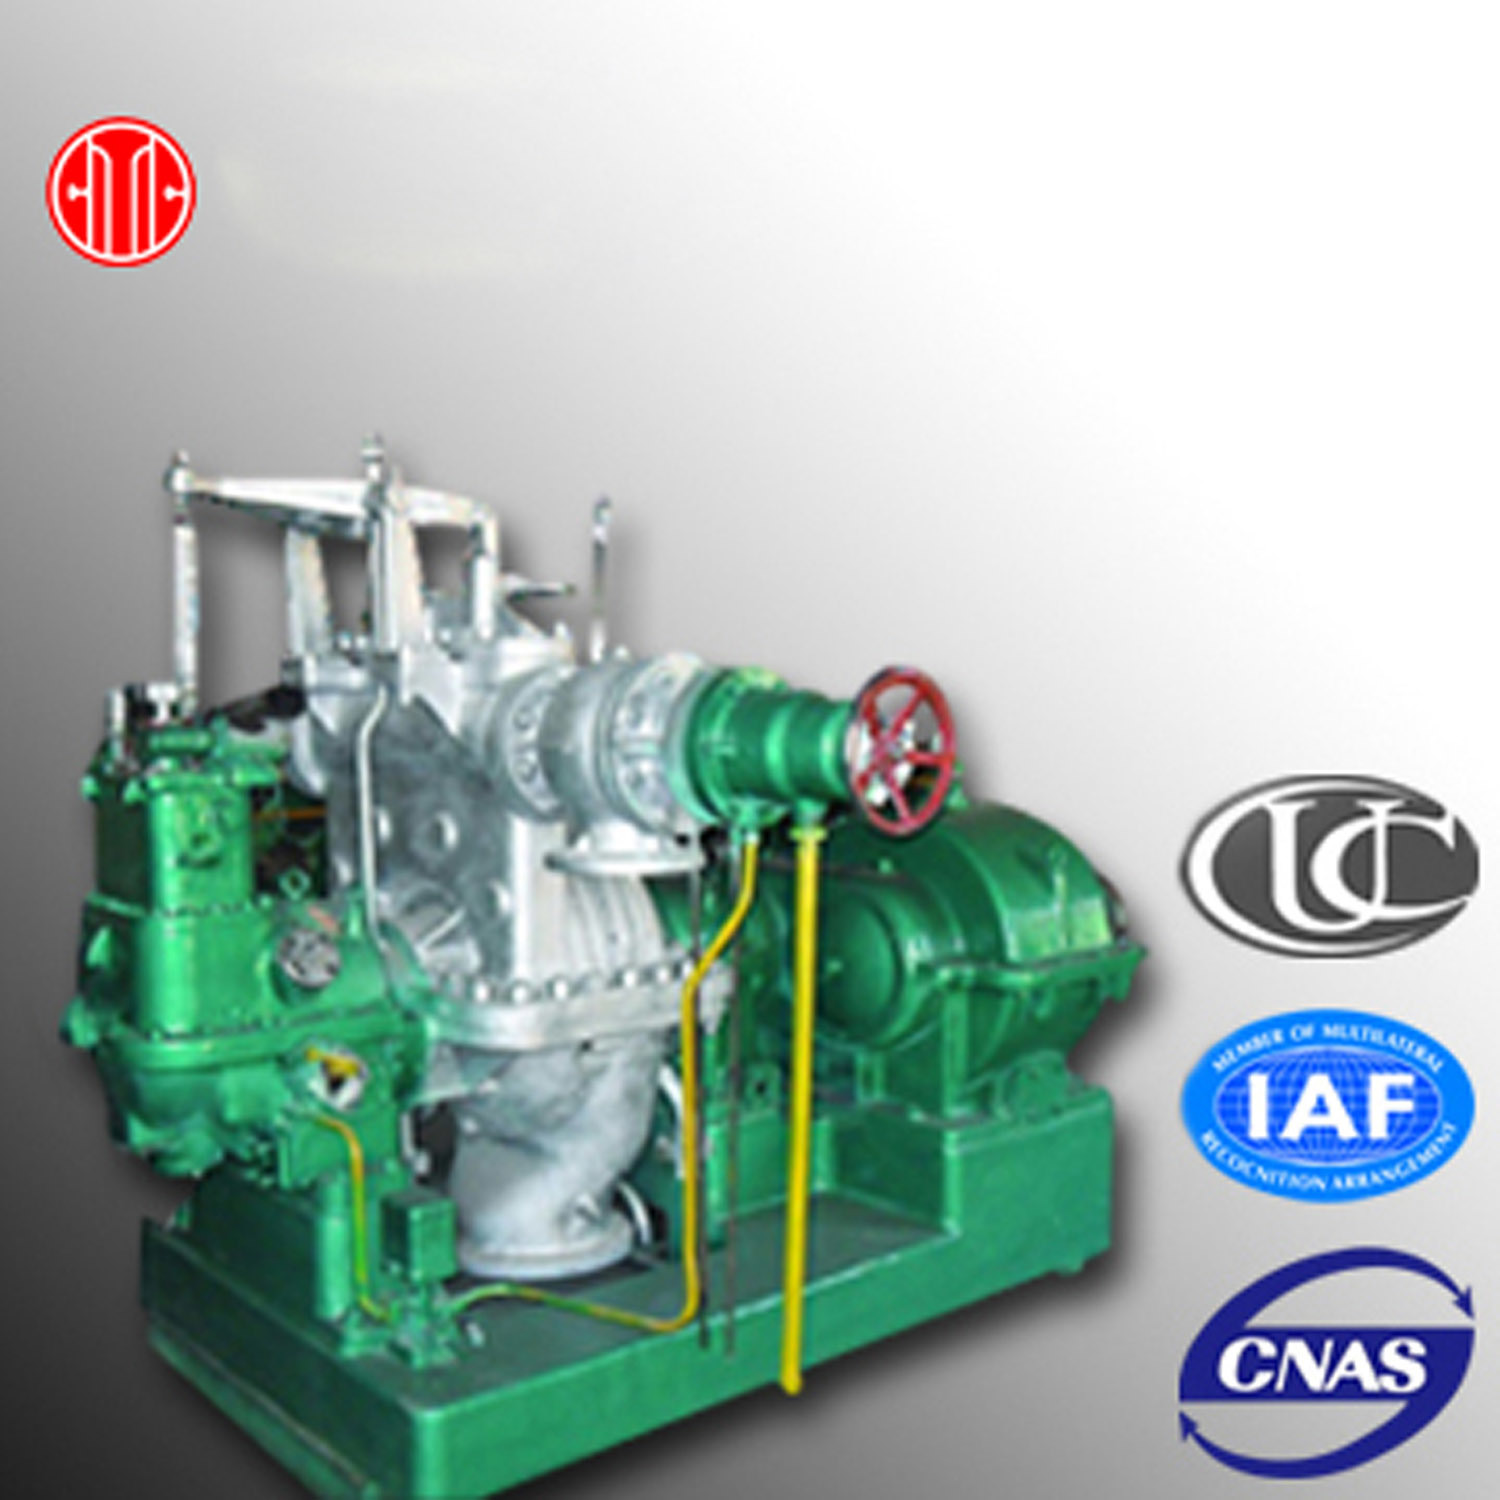 Condensing Steam Turbine Used in Textile Industry